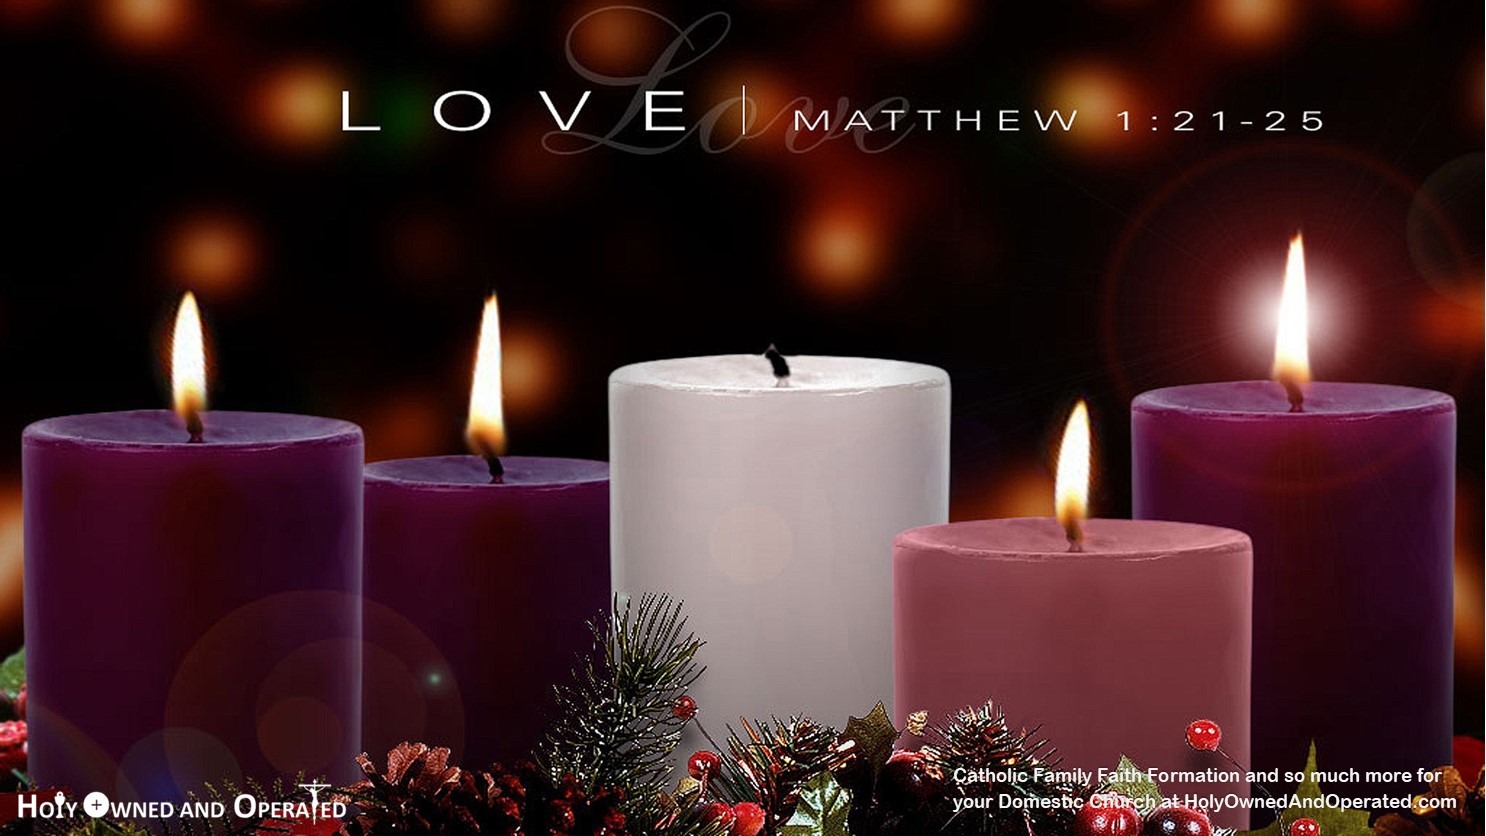 God is With Us - Advent Candles with three purple and one pink candle lit. Love - Matthew 1:21-25 text across top of image.